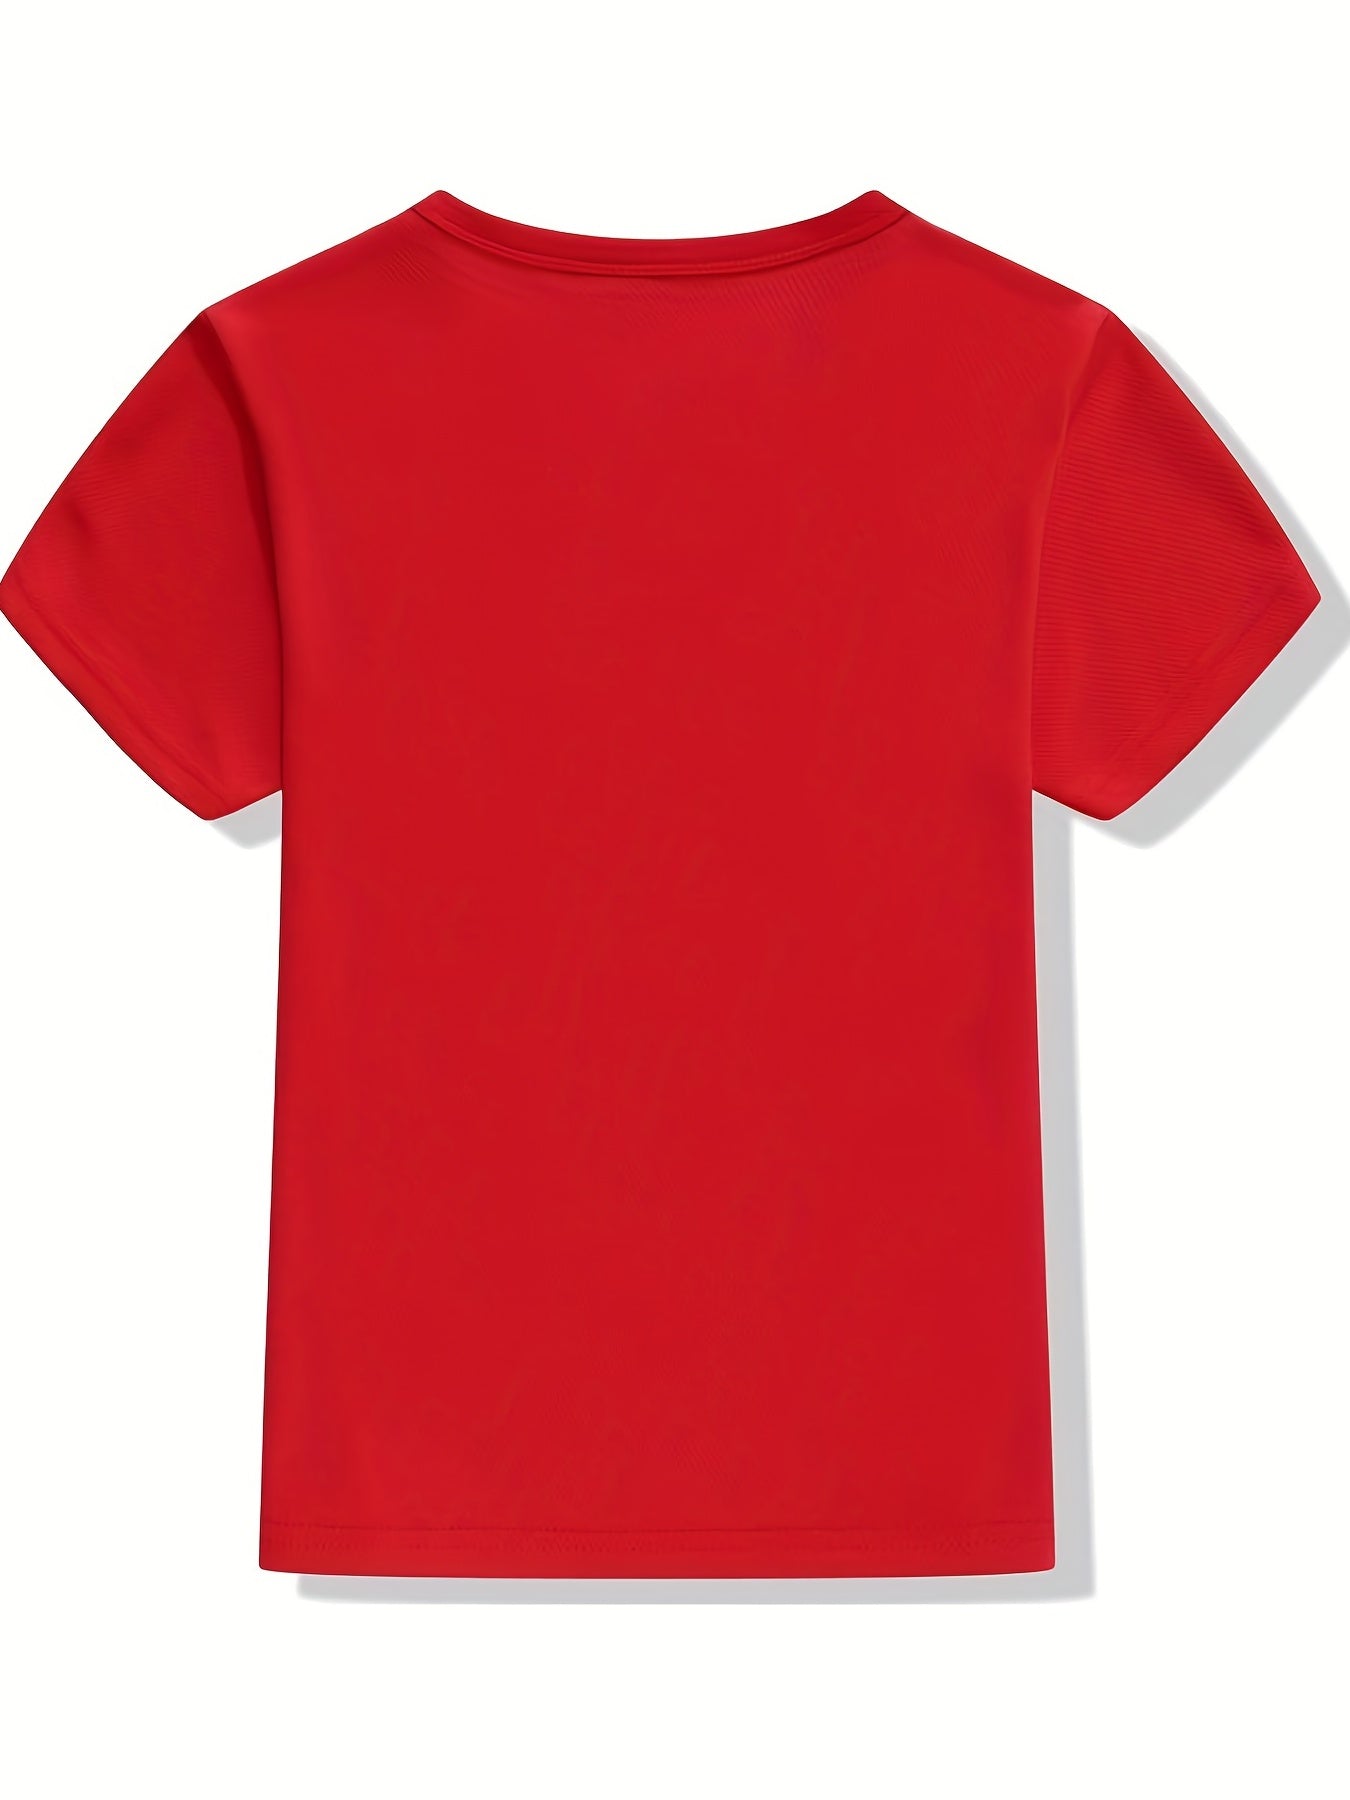 Boys Round Neck T-shirt Tee Top Casual Soft Comfortable For Summer Kids Clothes